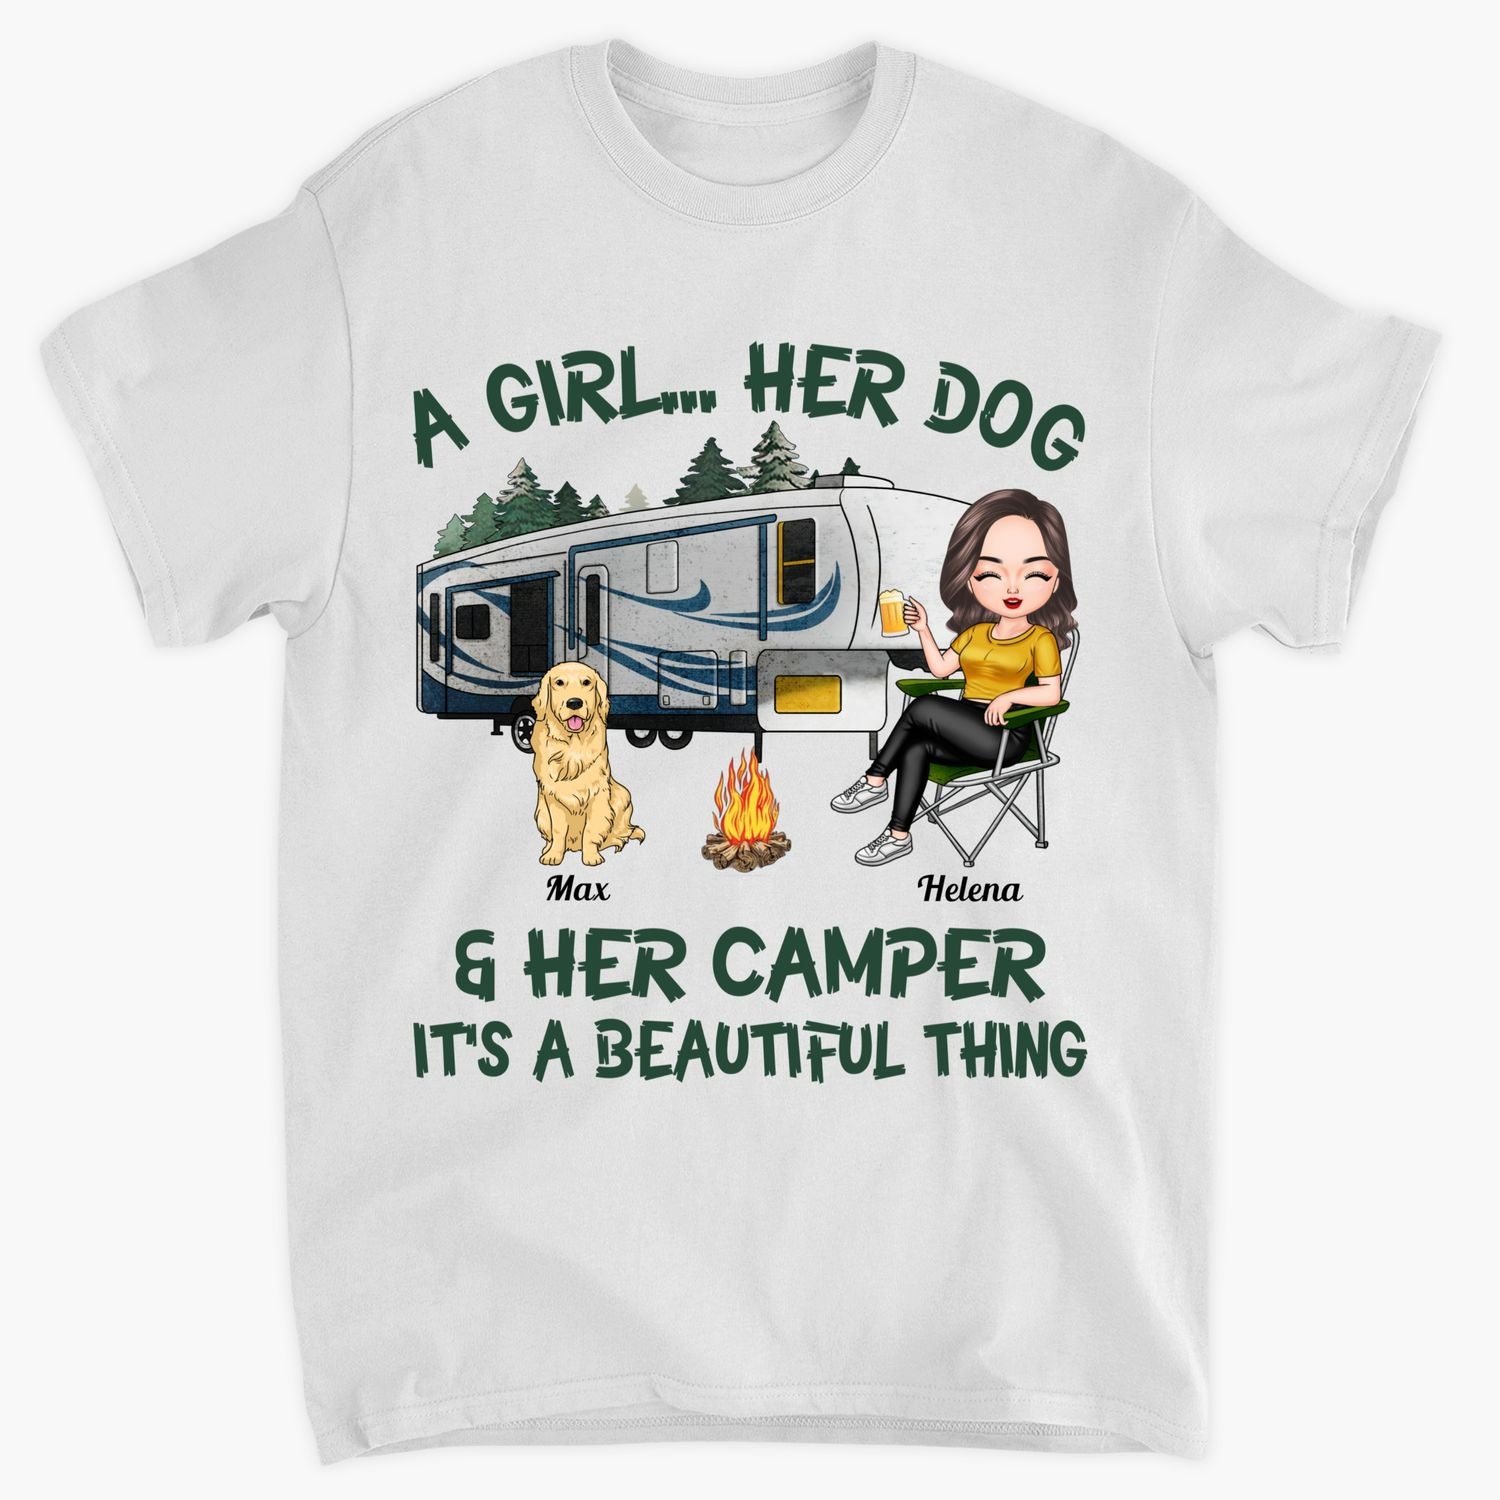 Personalized T-Shirt - Gift For Camping Lover - A Girl Her Dog And Her Camper It's A Beautiful Thing